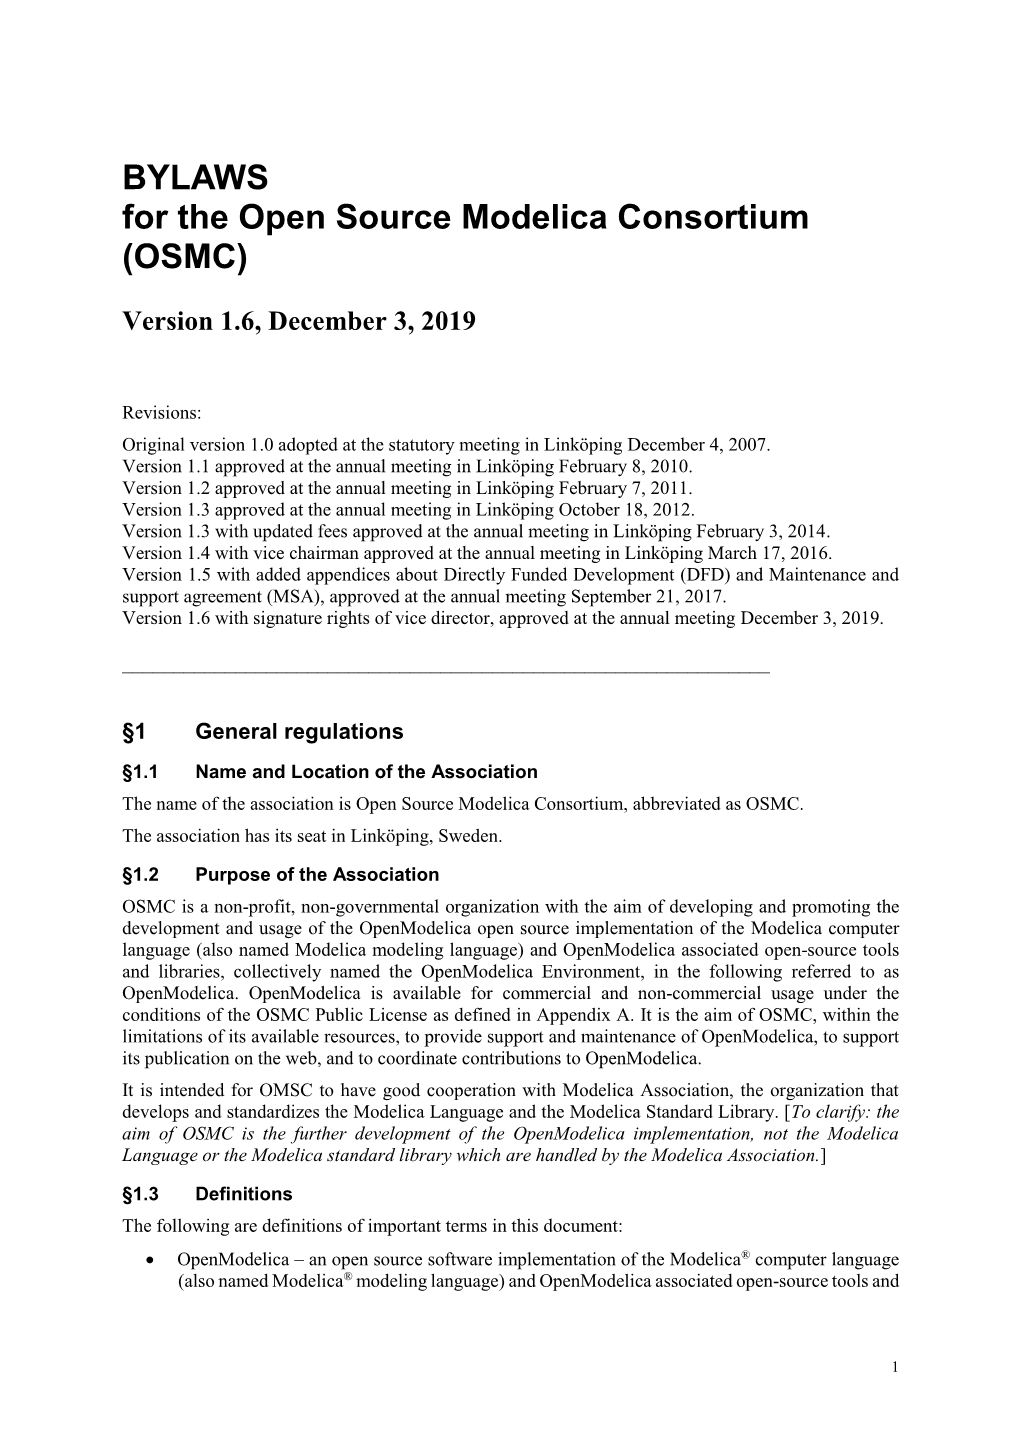 BYLAWS for the Open Source Modelica Consortium (OSMC)